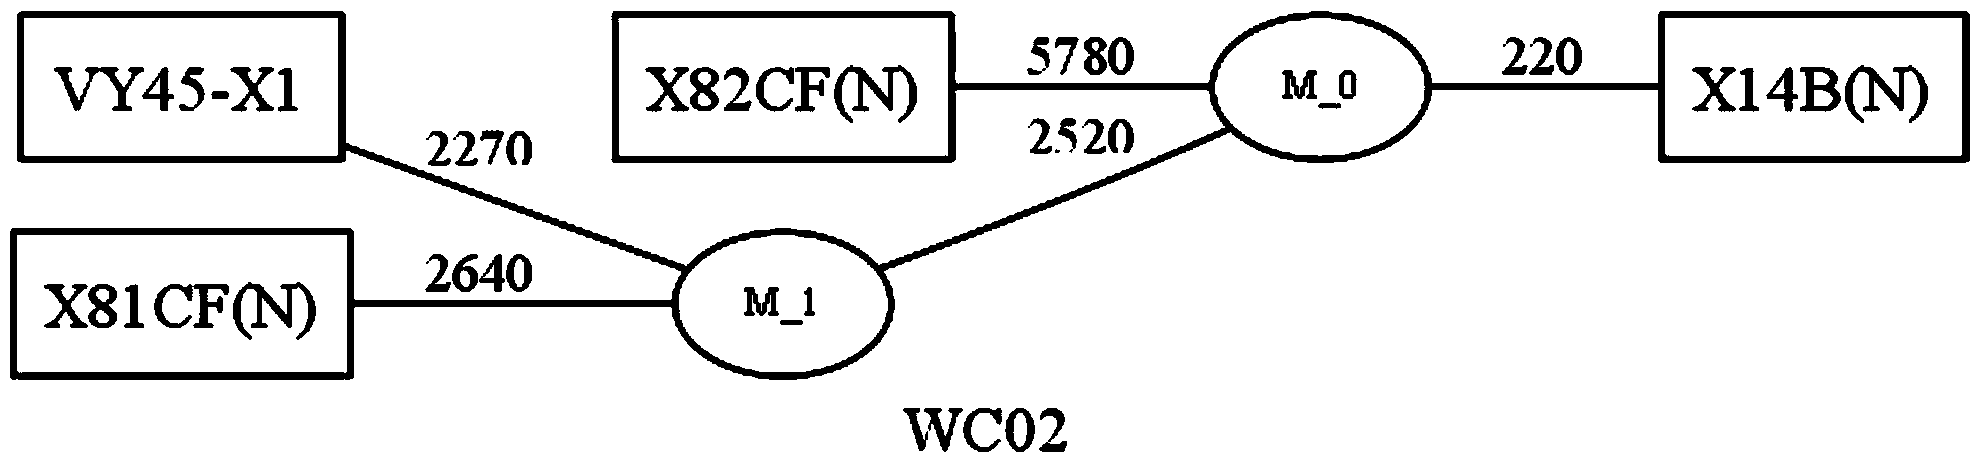 Determination method for length and number of low-frequency cable conductors of spacecraft